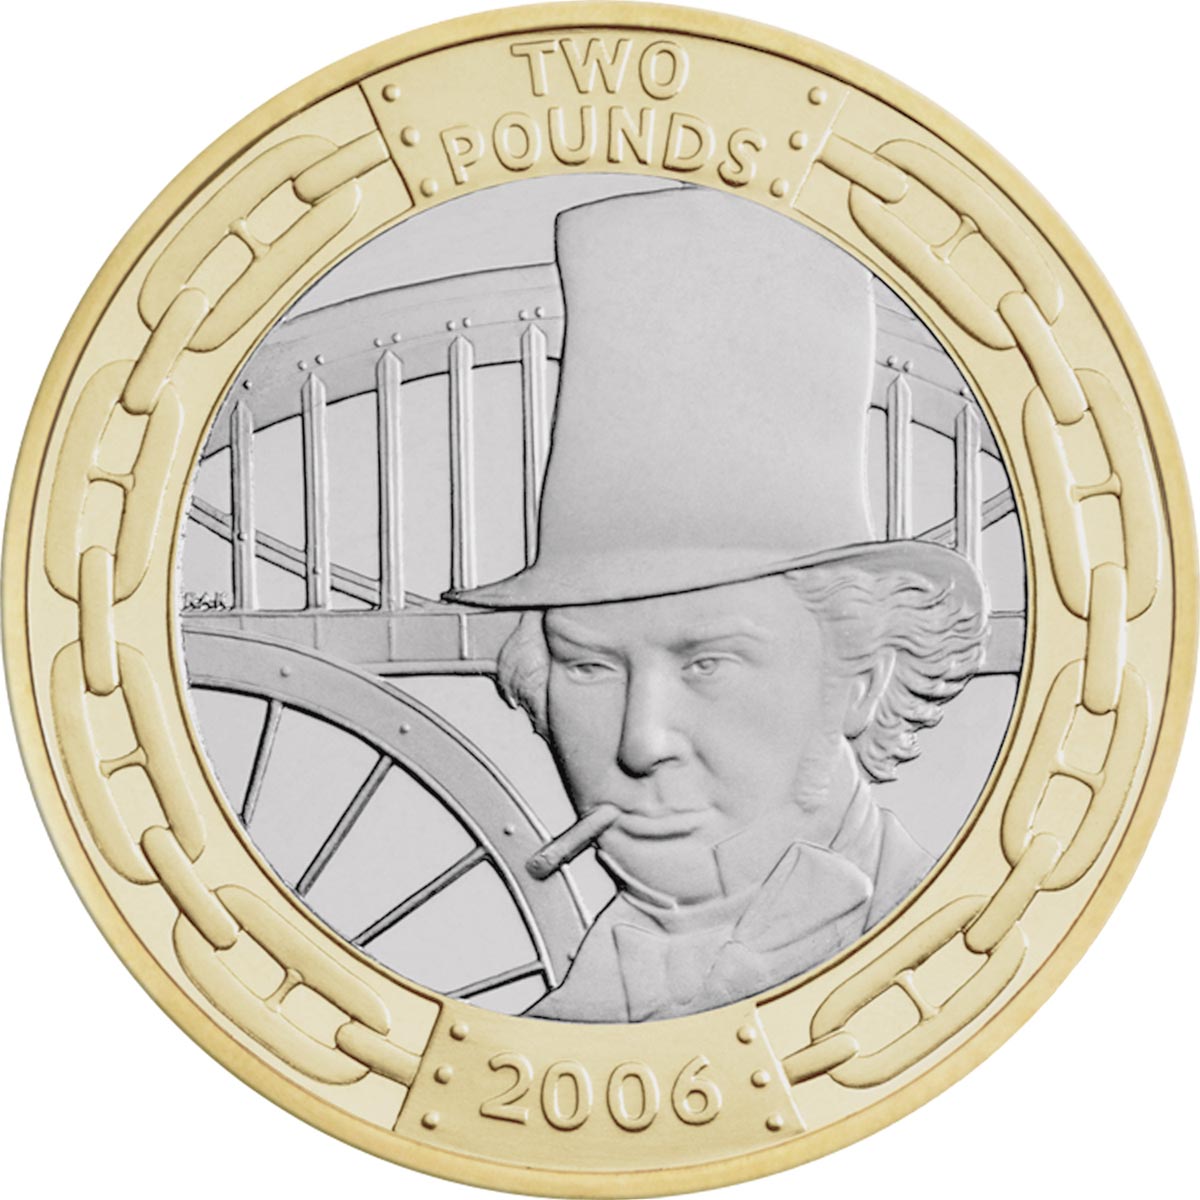 Image of 2 pounds coin - Bicentenary of the birth of Isambard Kingdom Brunel | United Kingdom 2006.  The Bimetal: CuNi, nordic gold coin is of Proof, BU, UNC quality.